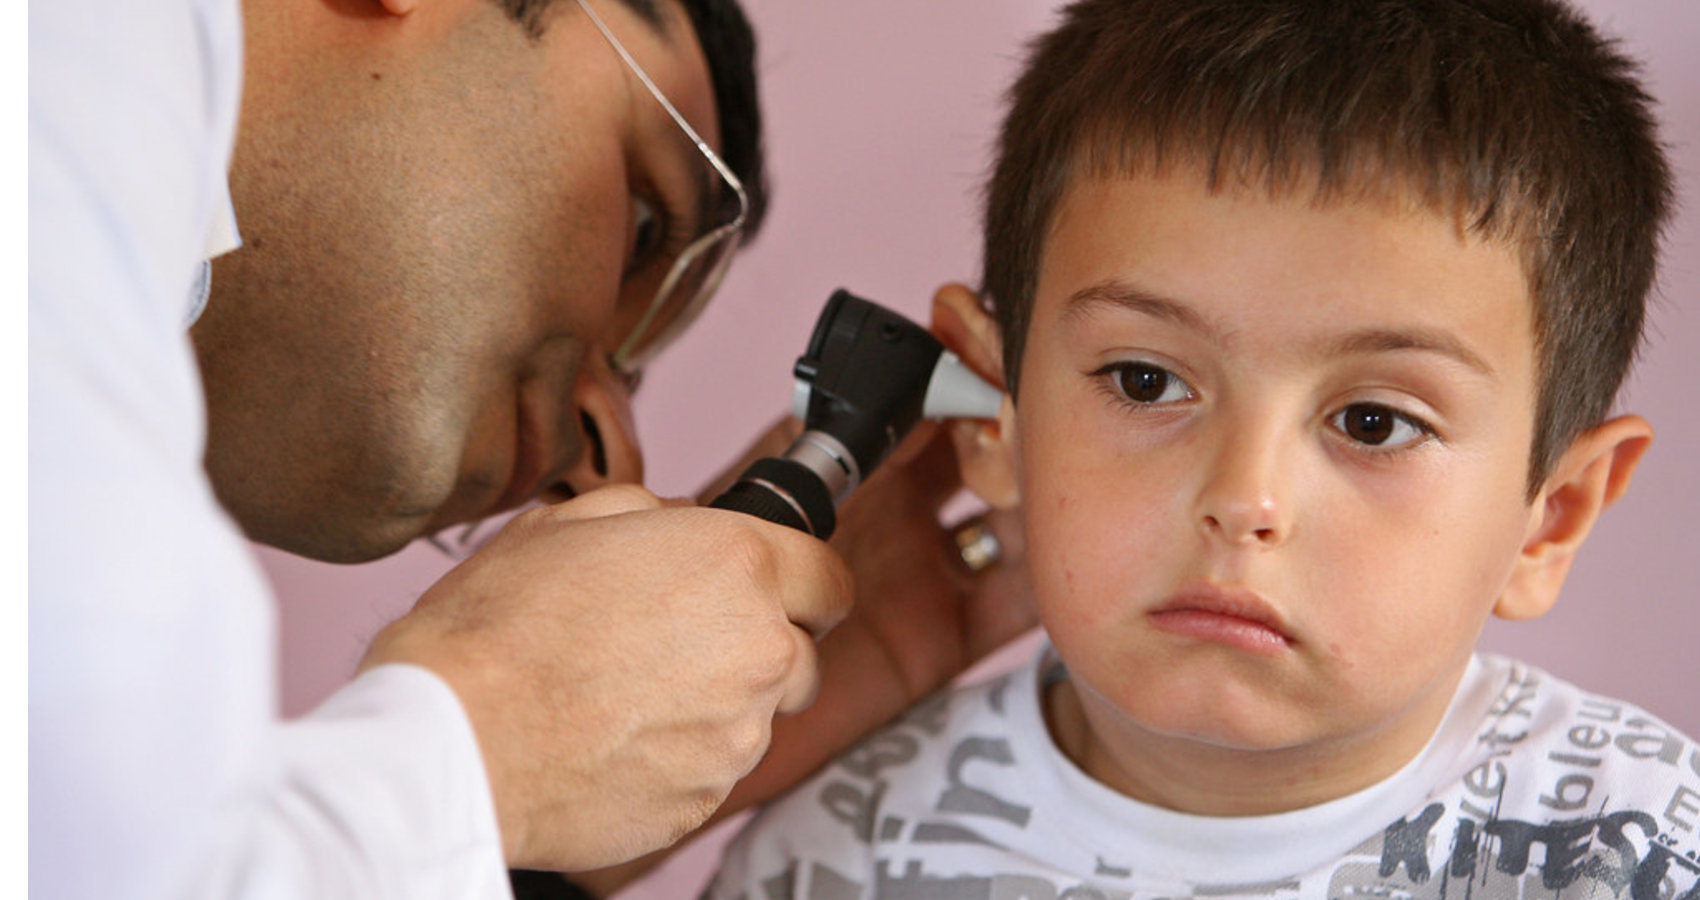 A child getting their ear checked at doctor